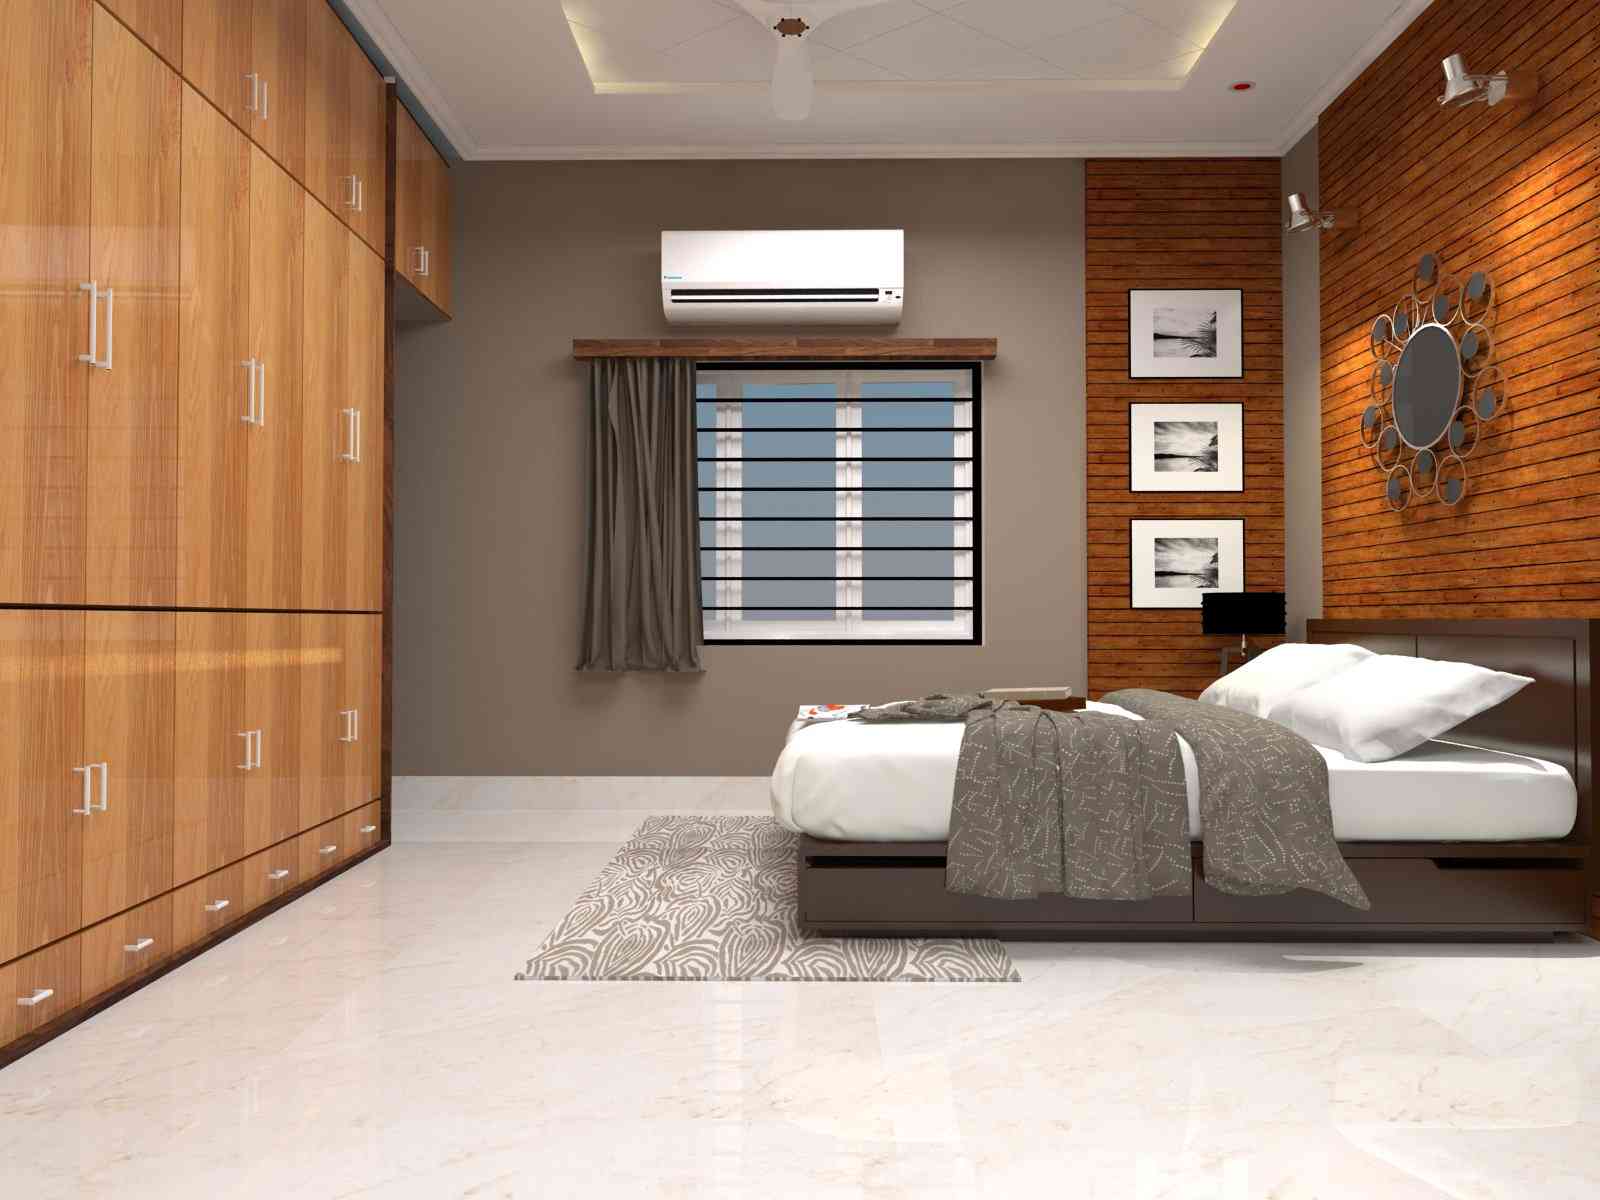 Contemporary Master Bedroom Design With Grey And Wooden Wardrobe